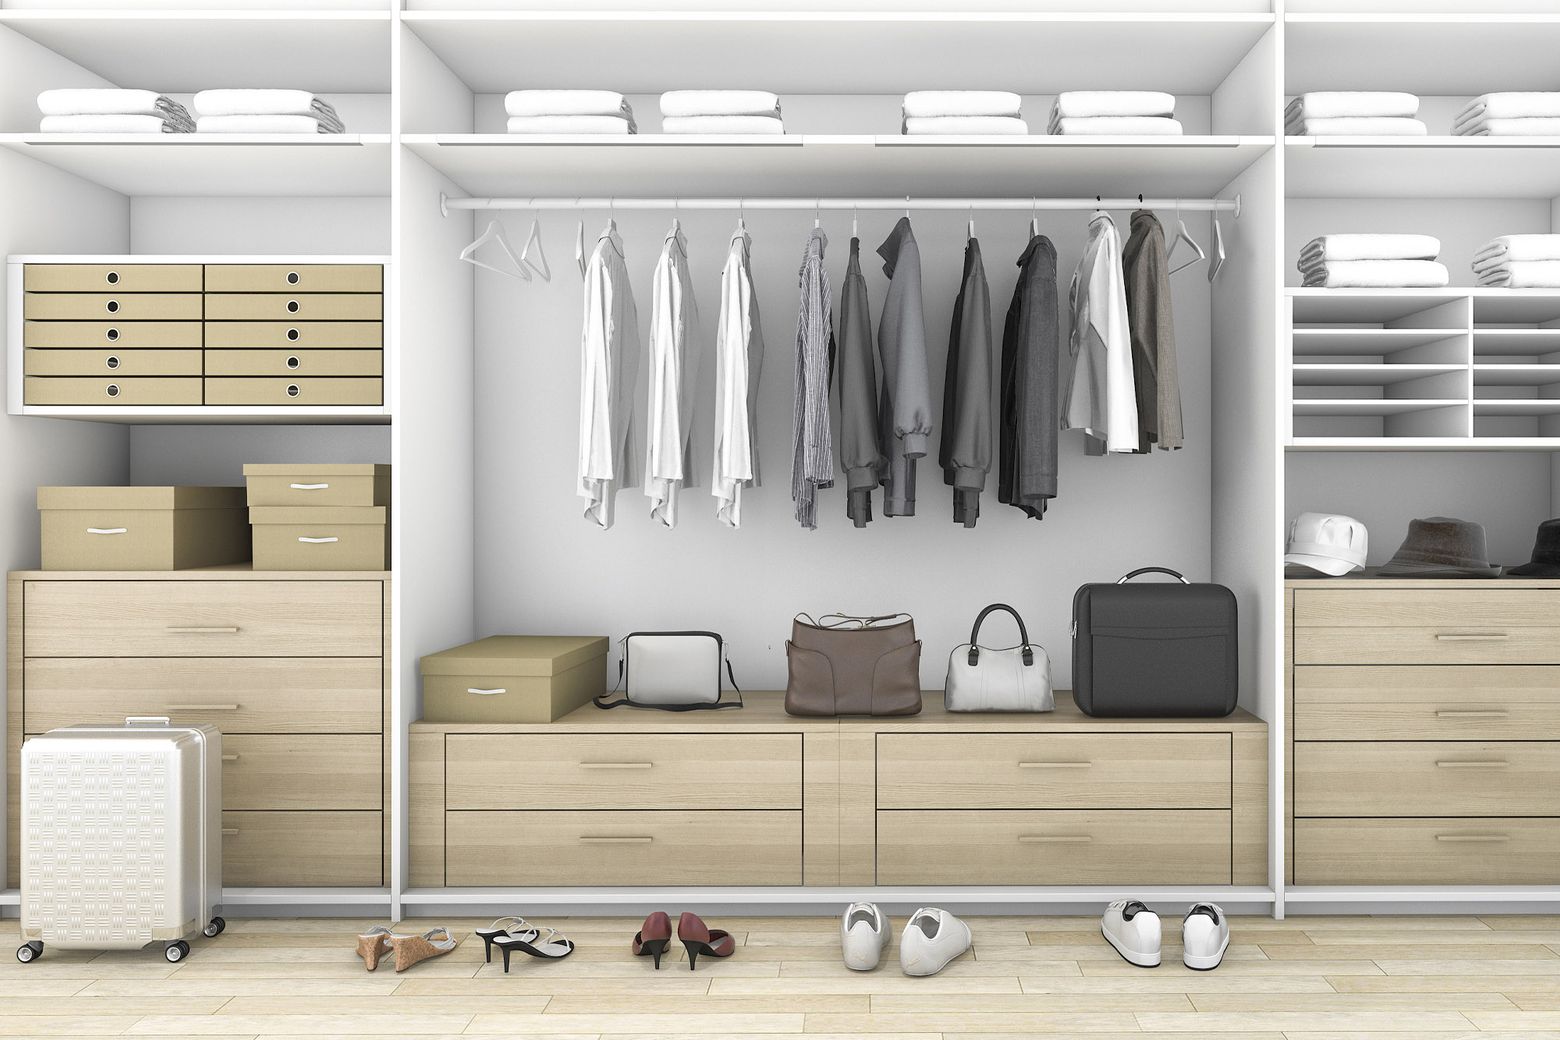 Small Closet Ideas: 21 Ways to Make Better Use of Your Space - Bob